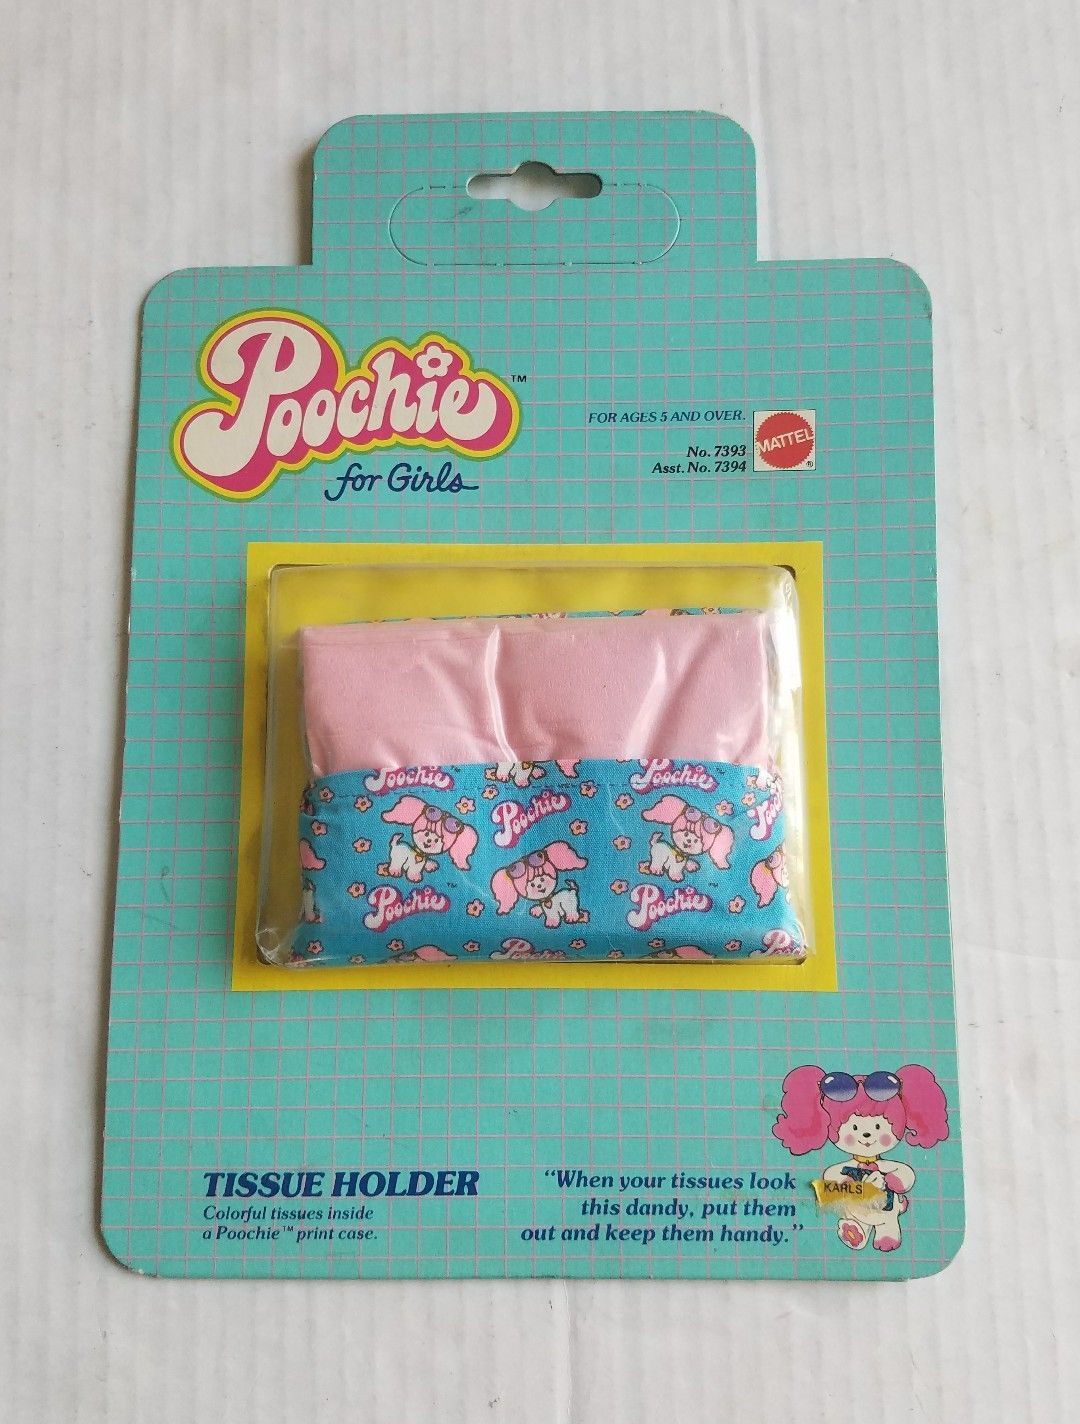 20 Poochie Toys And Accessories That Will Make You Flash Back To Your Childhood